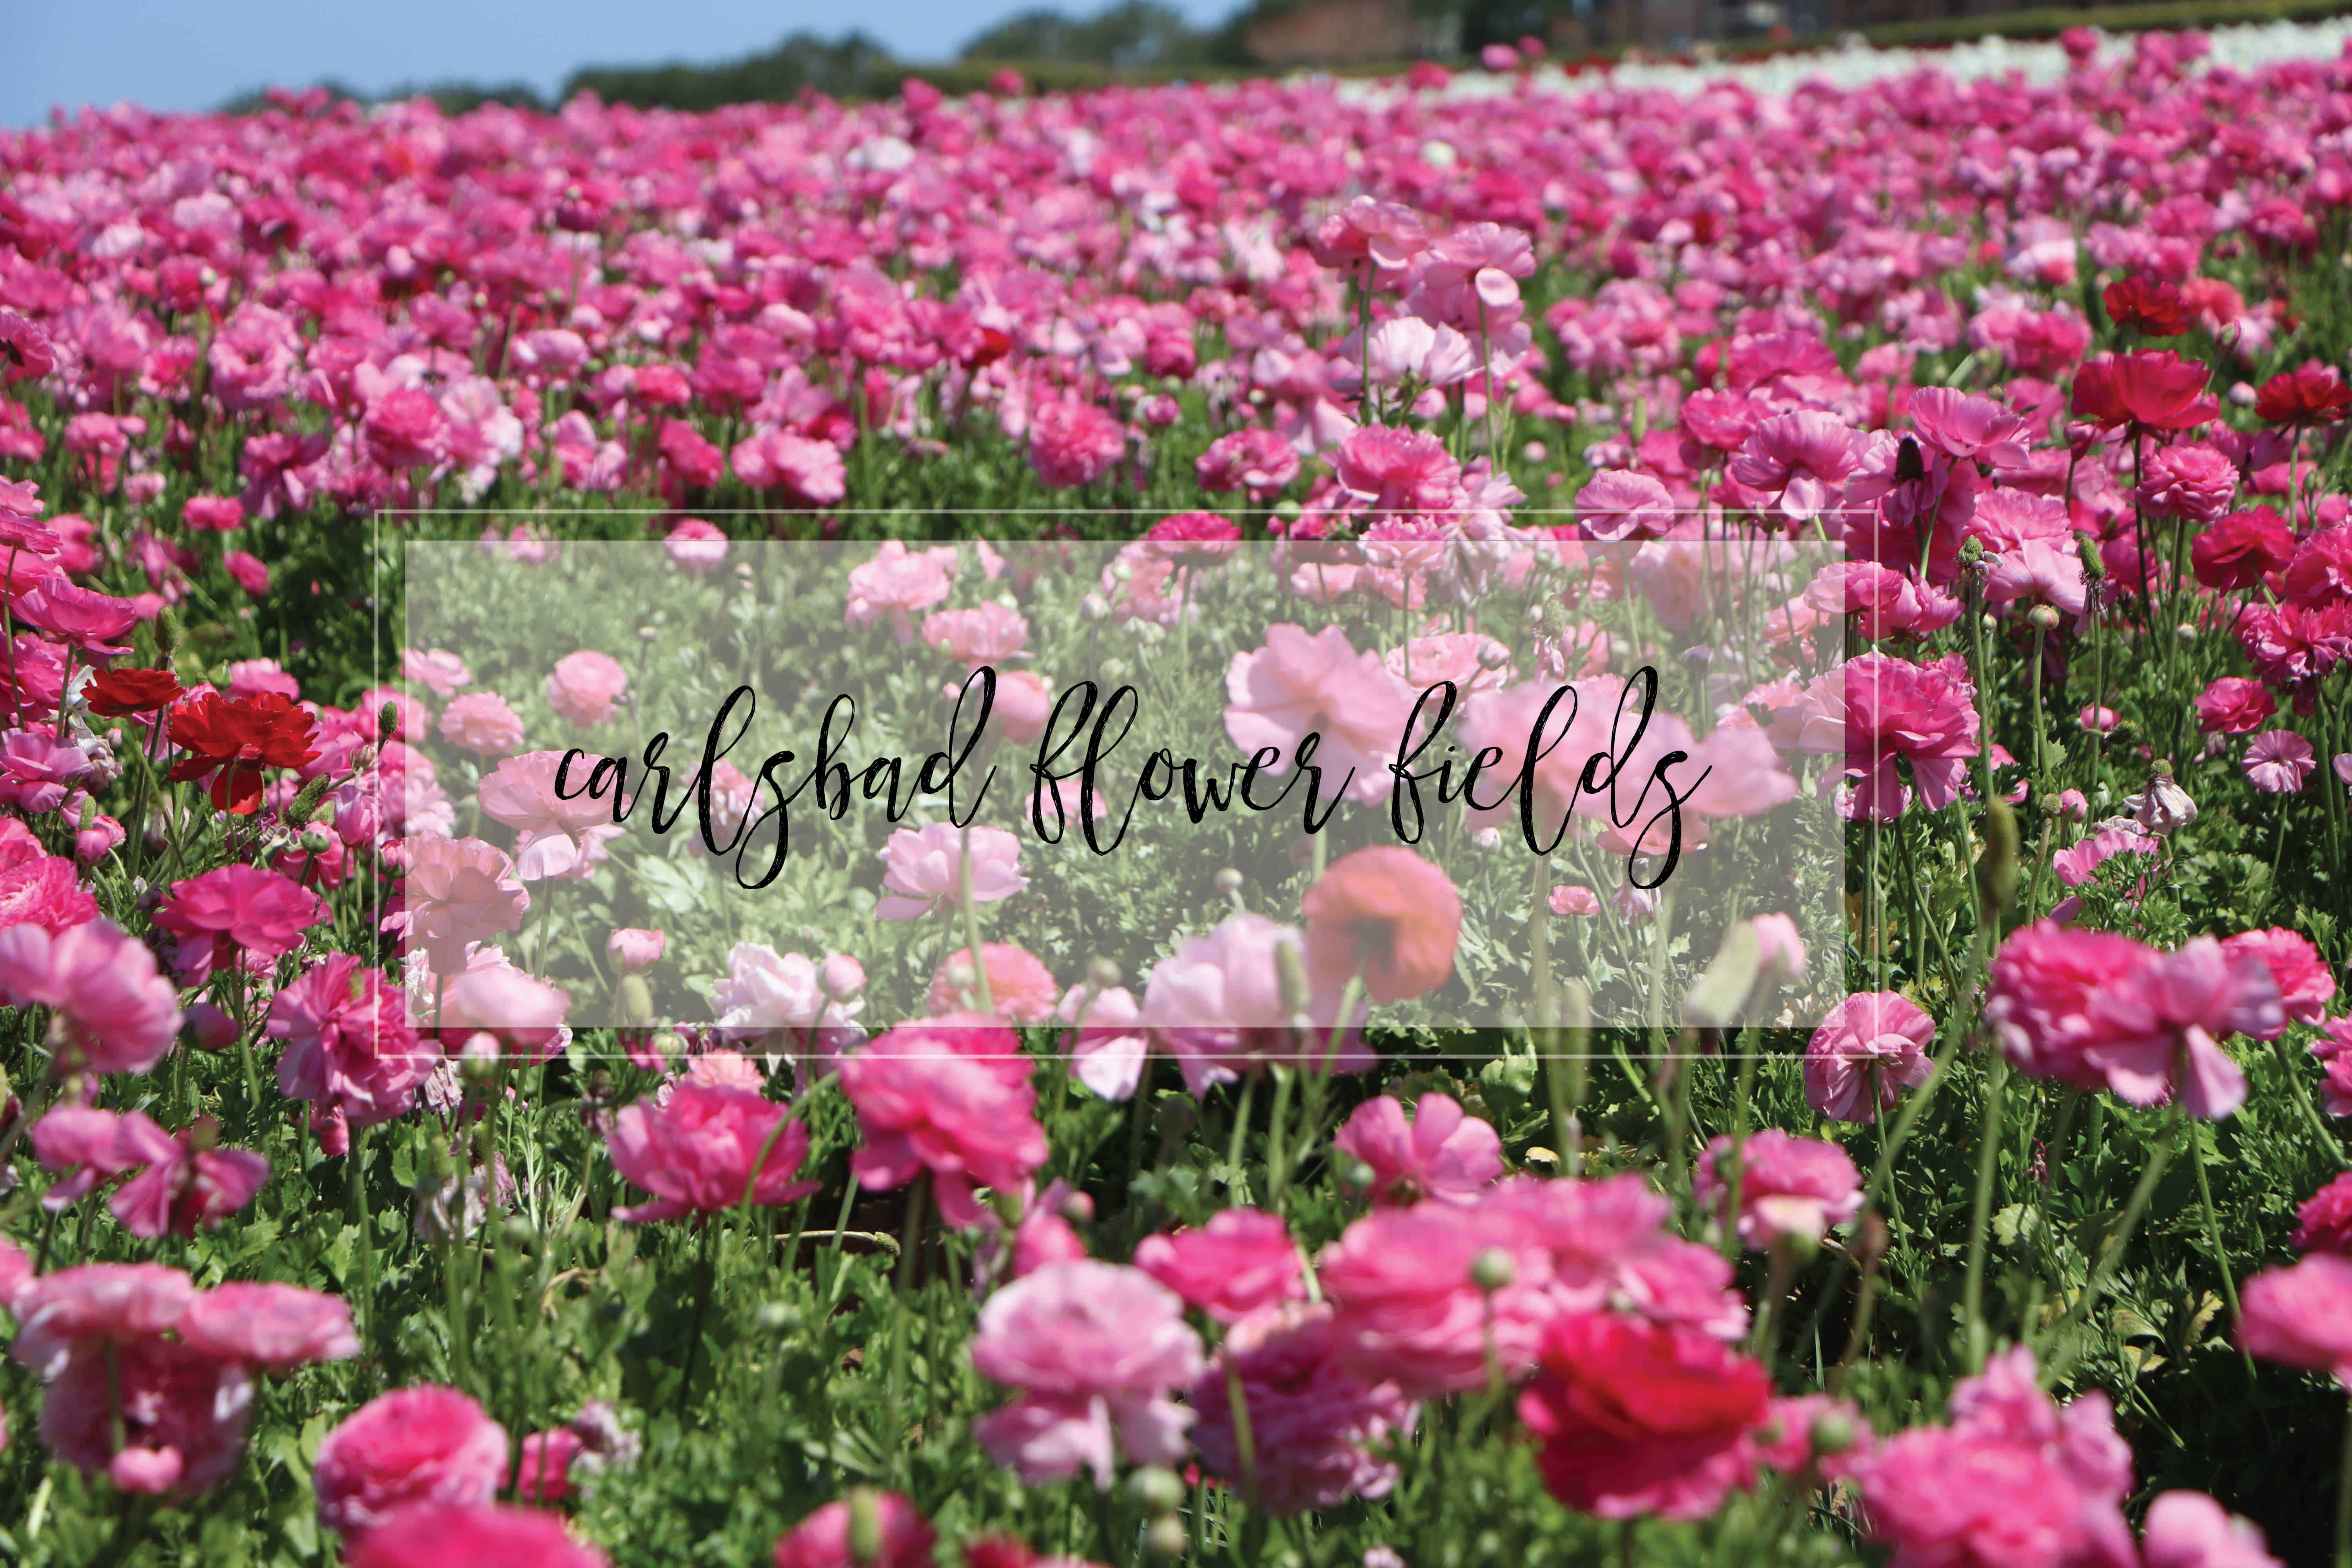 Carlsbad Flower Fields|Ahrens at Home